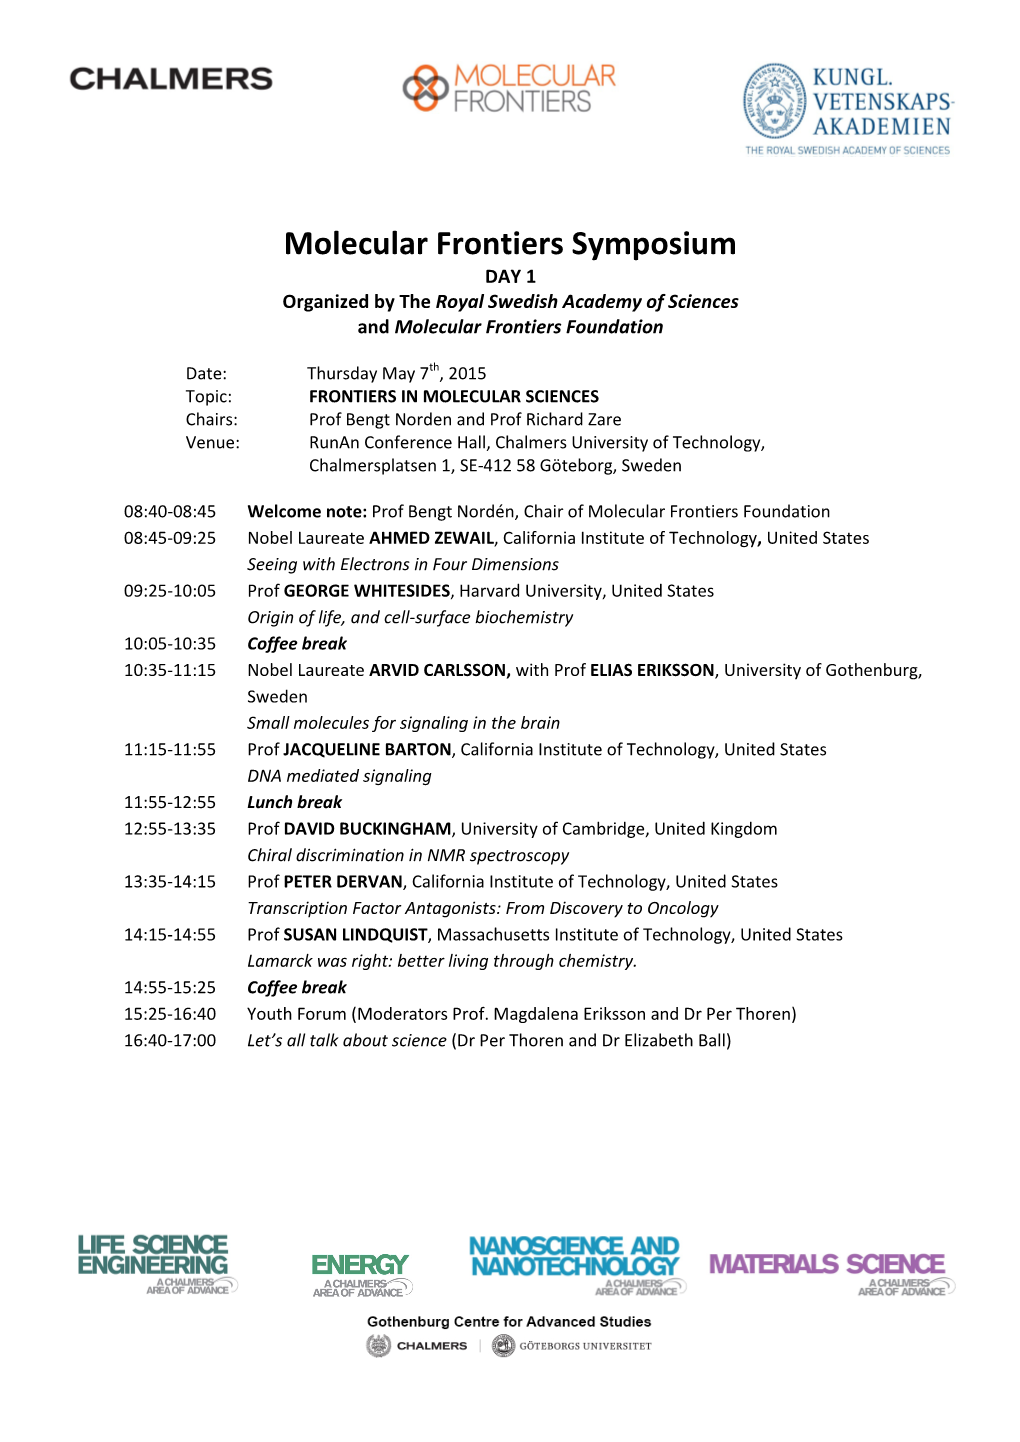 Molecular Frontiers Symposium DAY 1 Organized by the Royal Swedish Academy of Sciences and Molecular Frontiers Foundation